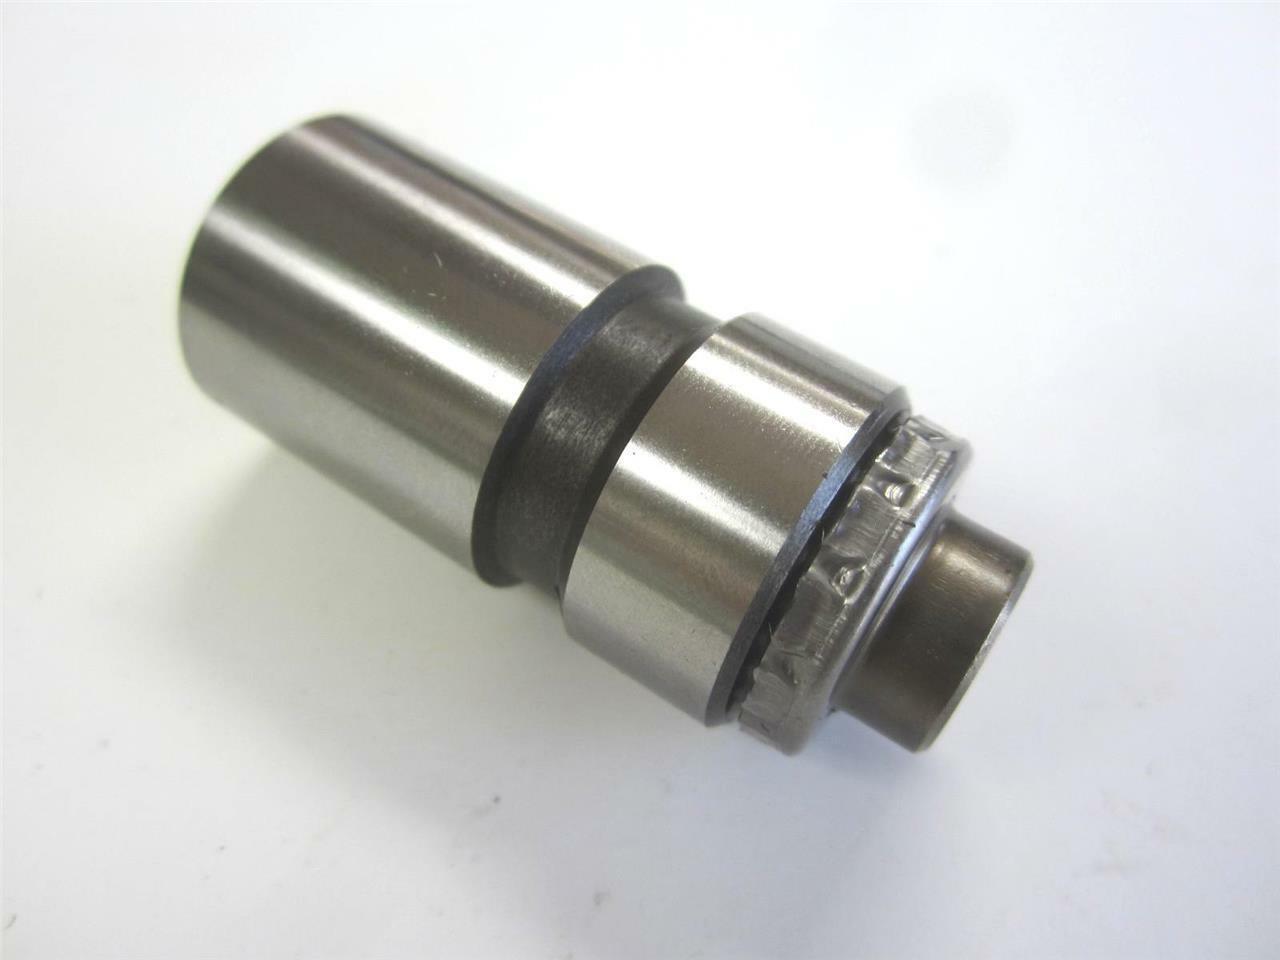 Primary image for 1 OEM Hydraulic Tappet block Valve Lifter Ford EXP Escort Mercury Lynx 1.6L 1.9L